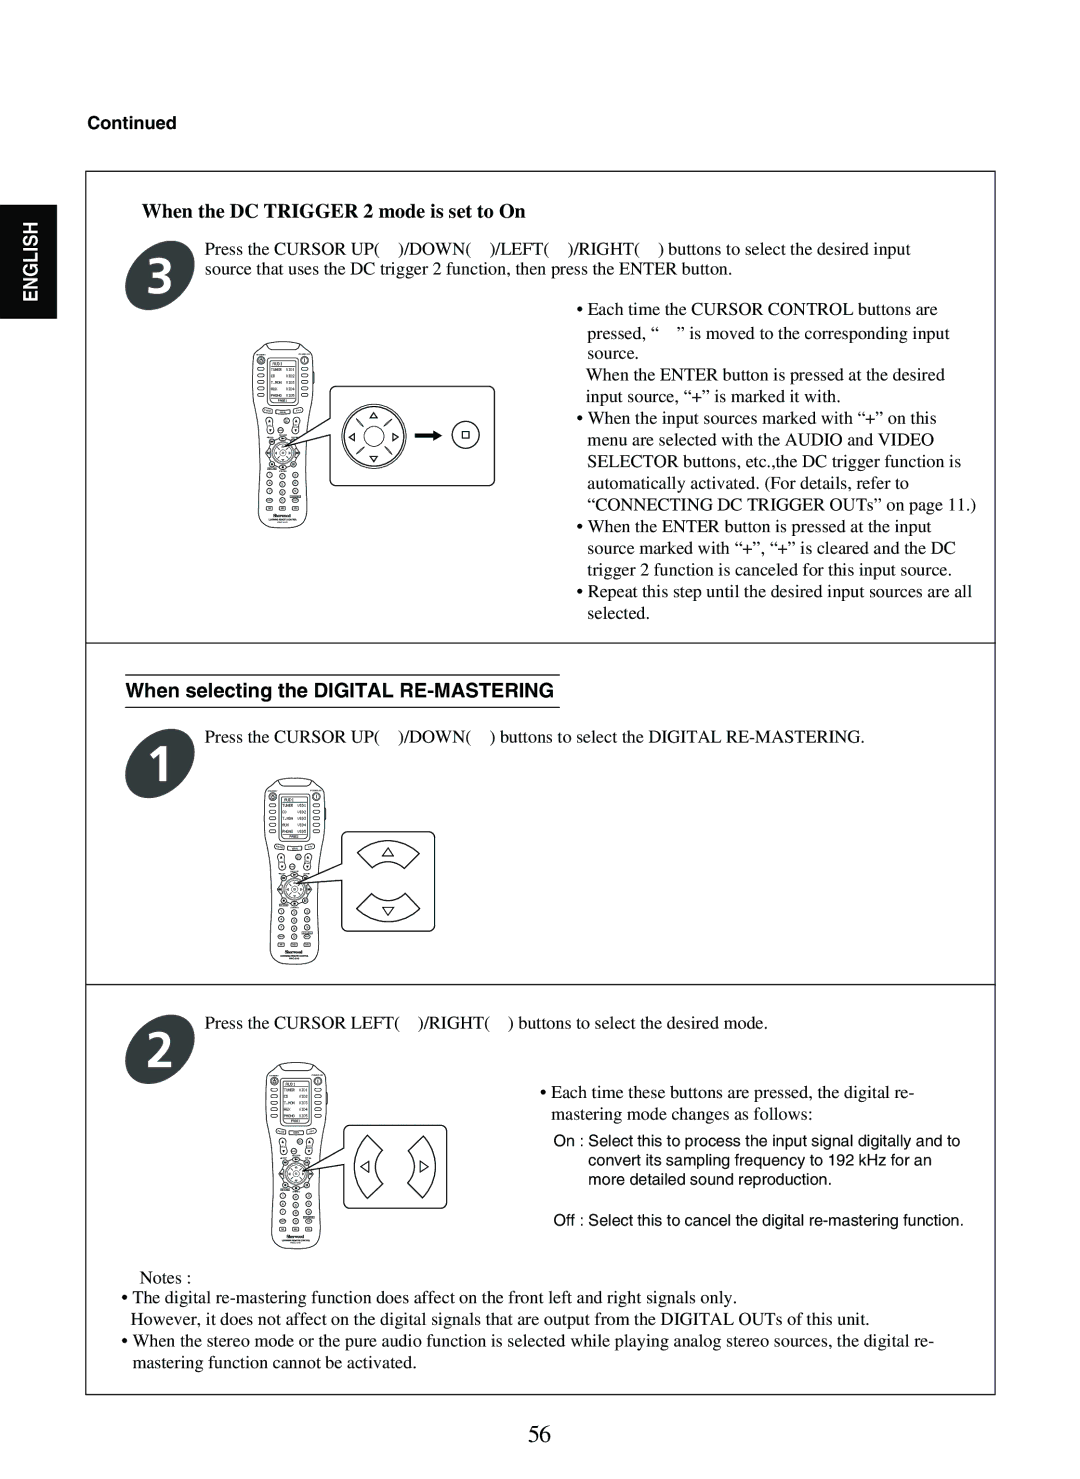 Sherwood P-965 manual When the DC Trigger 2 mode is set to On, When selecting the Digital RE-MASTERING 